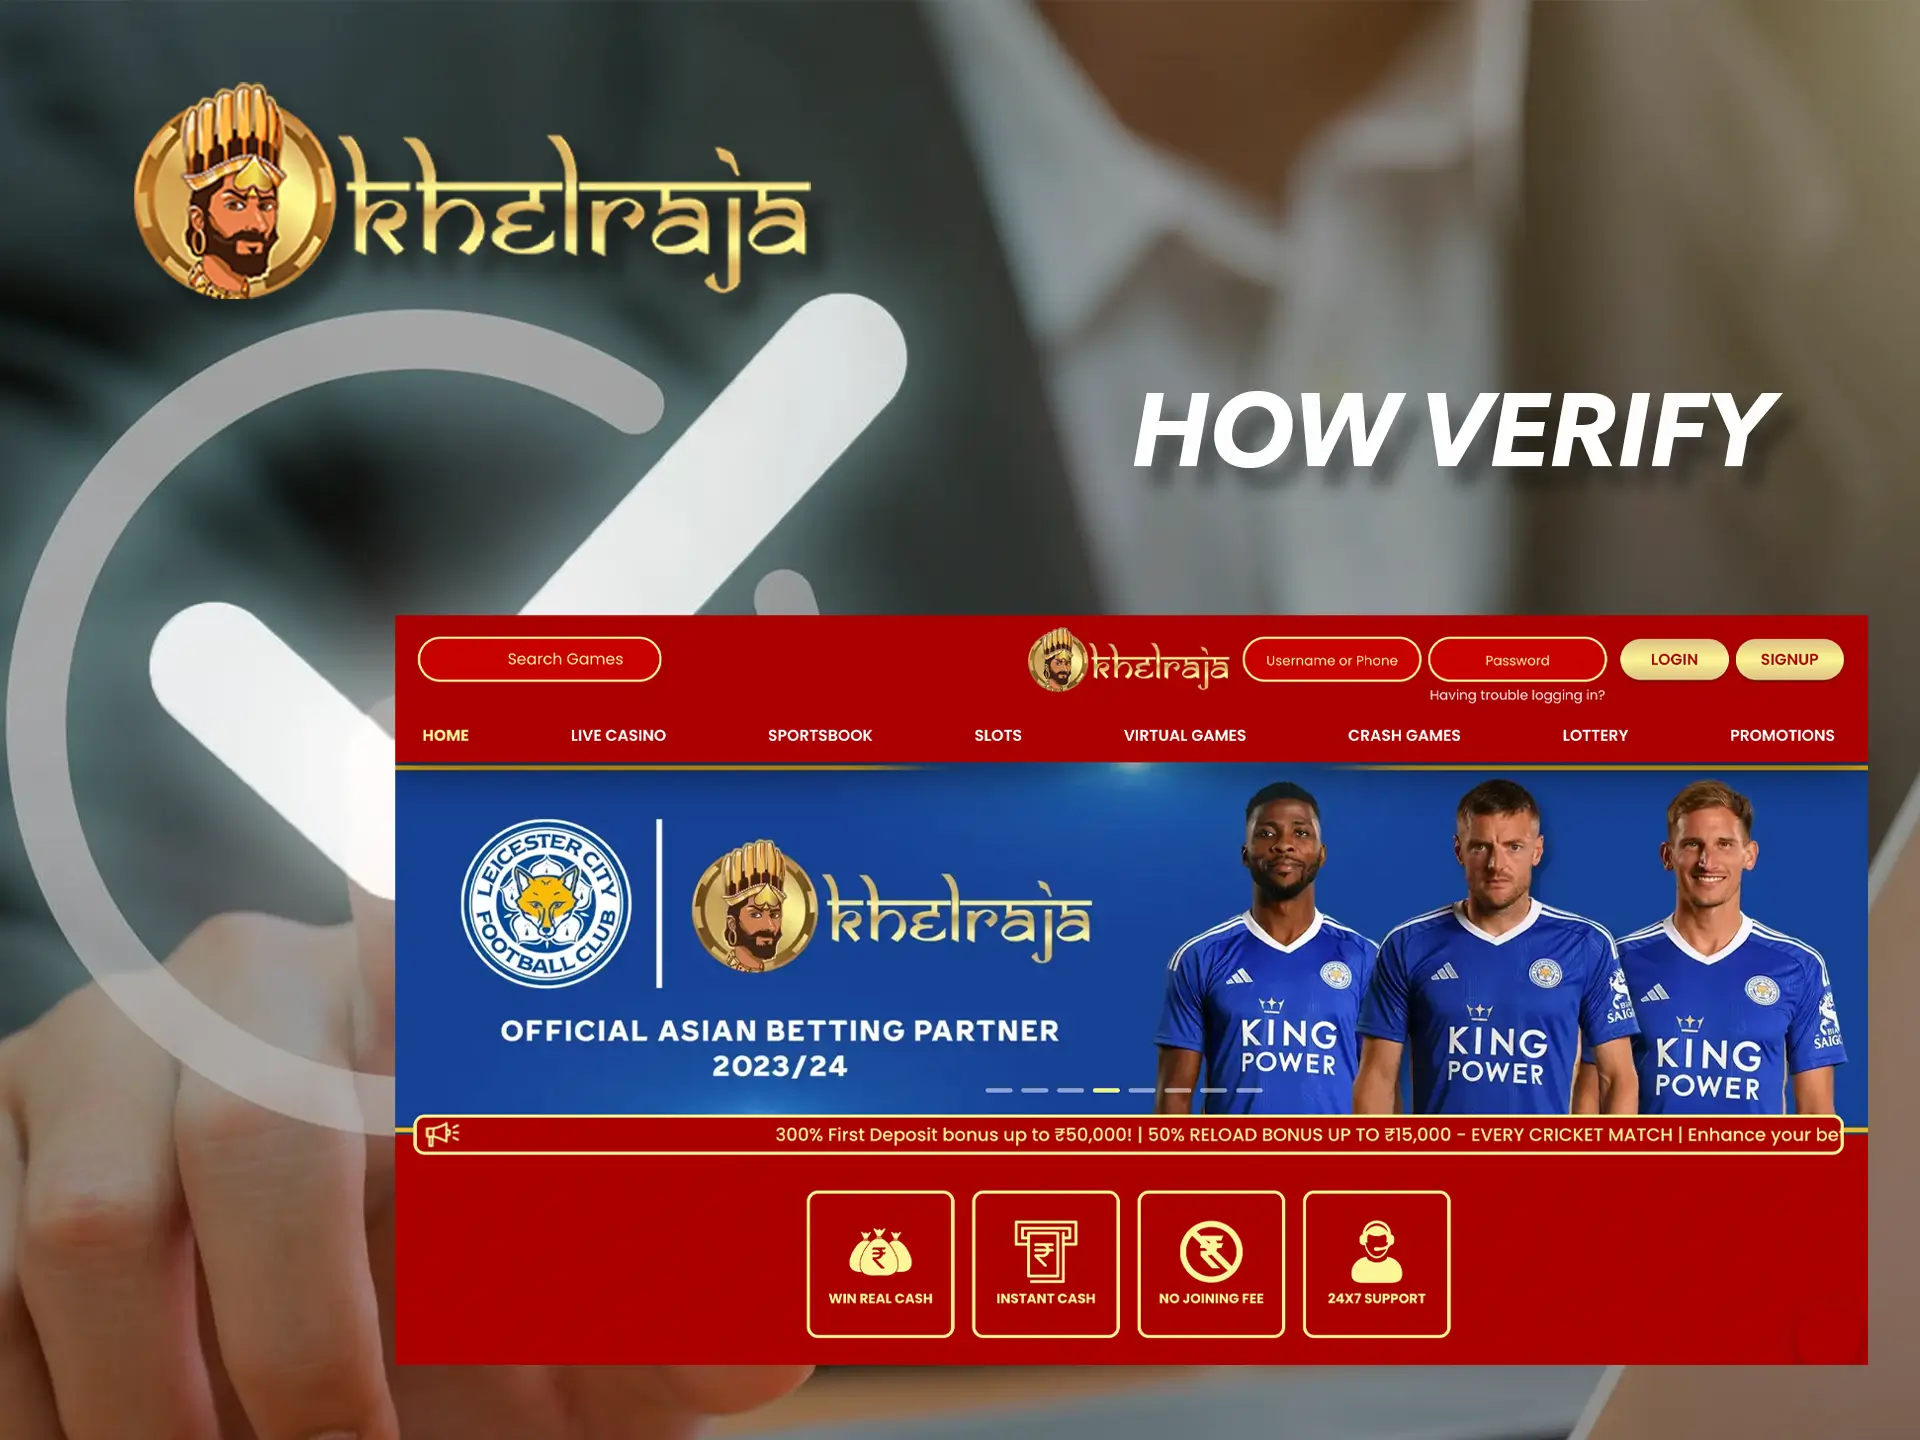 Confirm your account to access the new features of the Khelraja website.